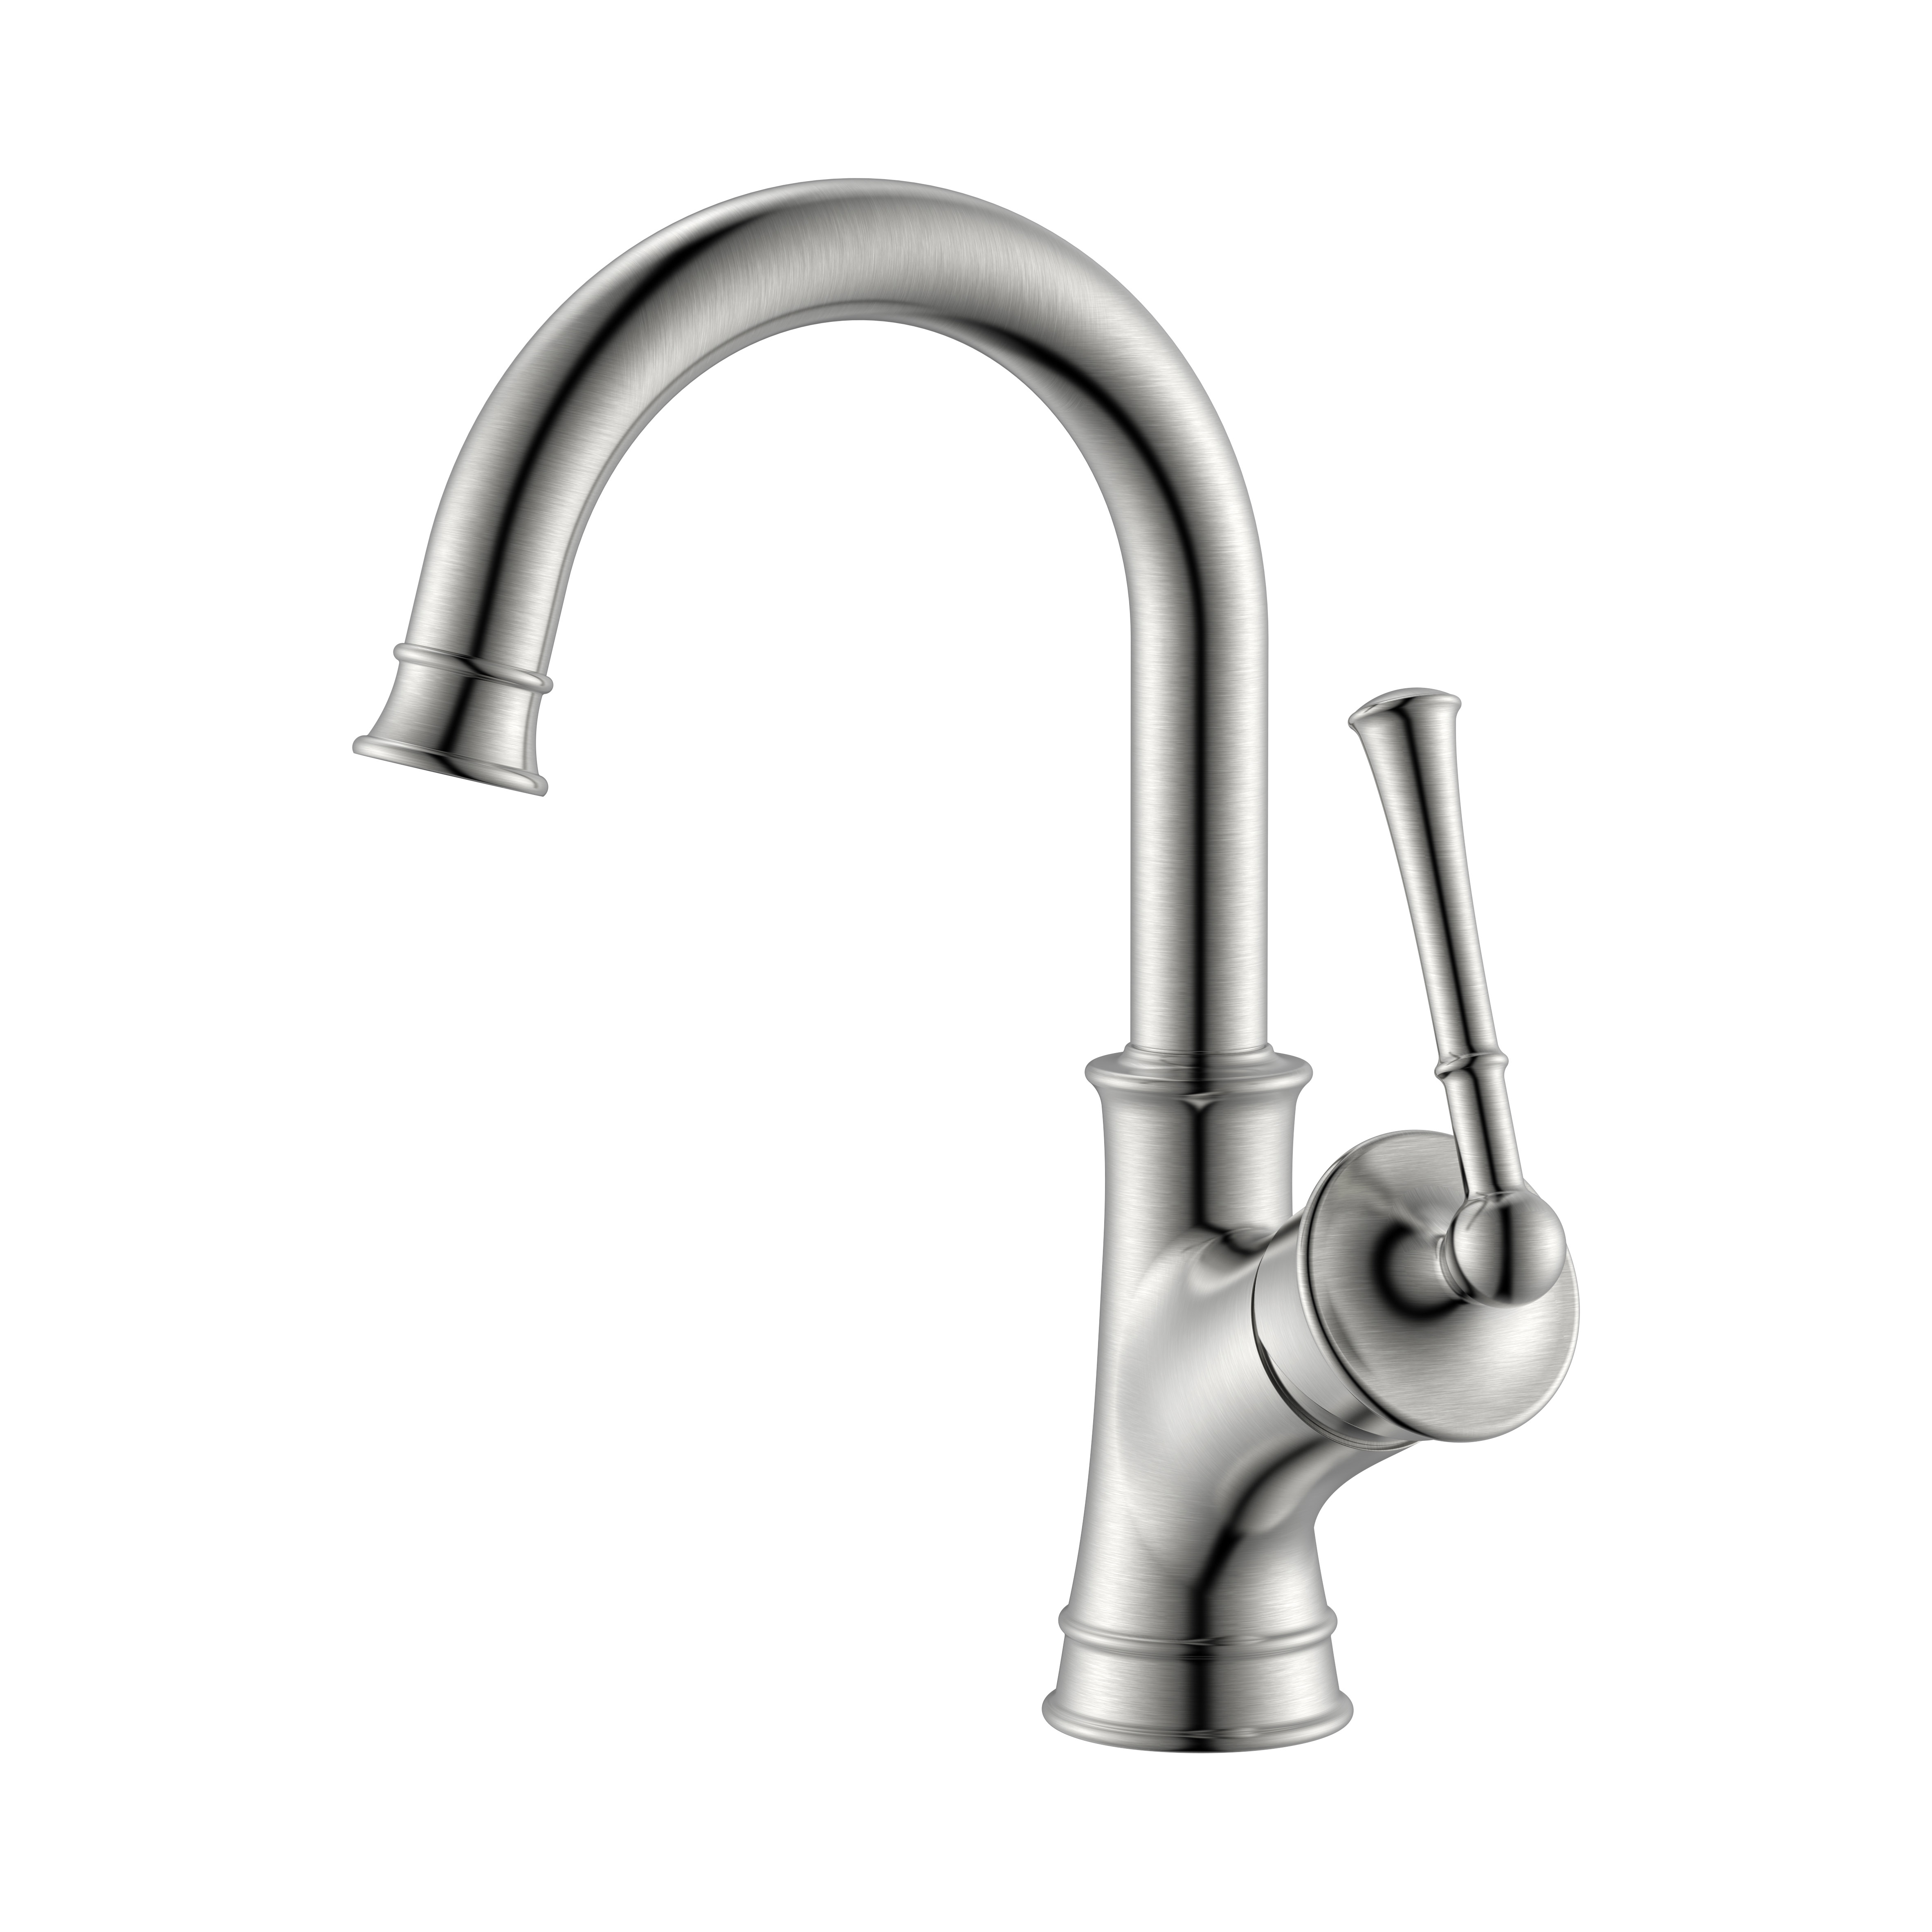 Single Handle Kitchen Faucet Brushed Nickel Kitchen Faucet